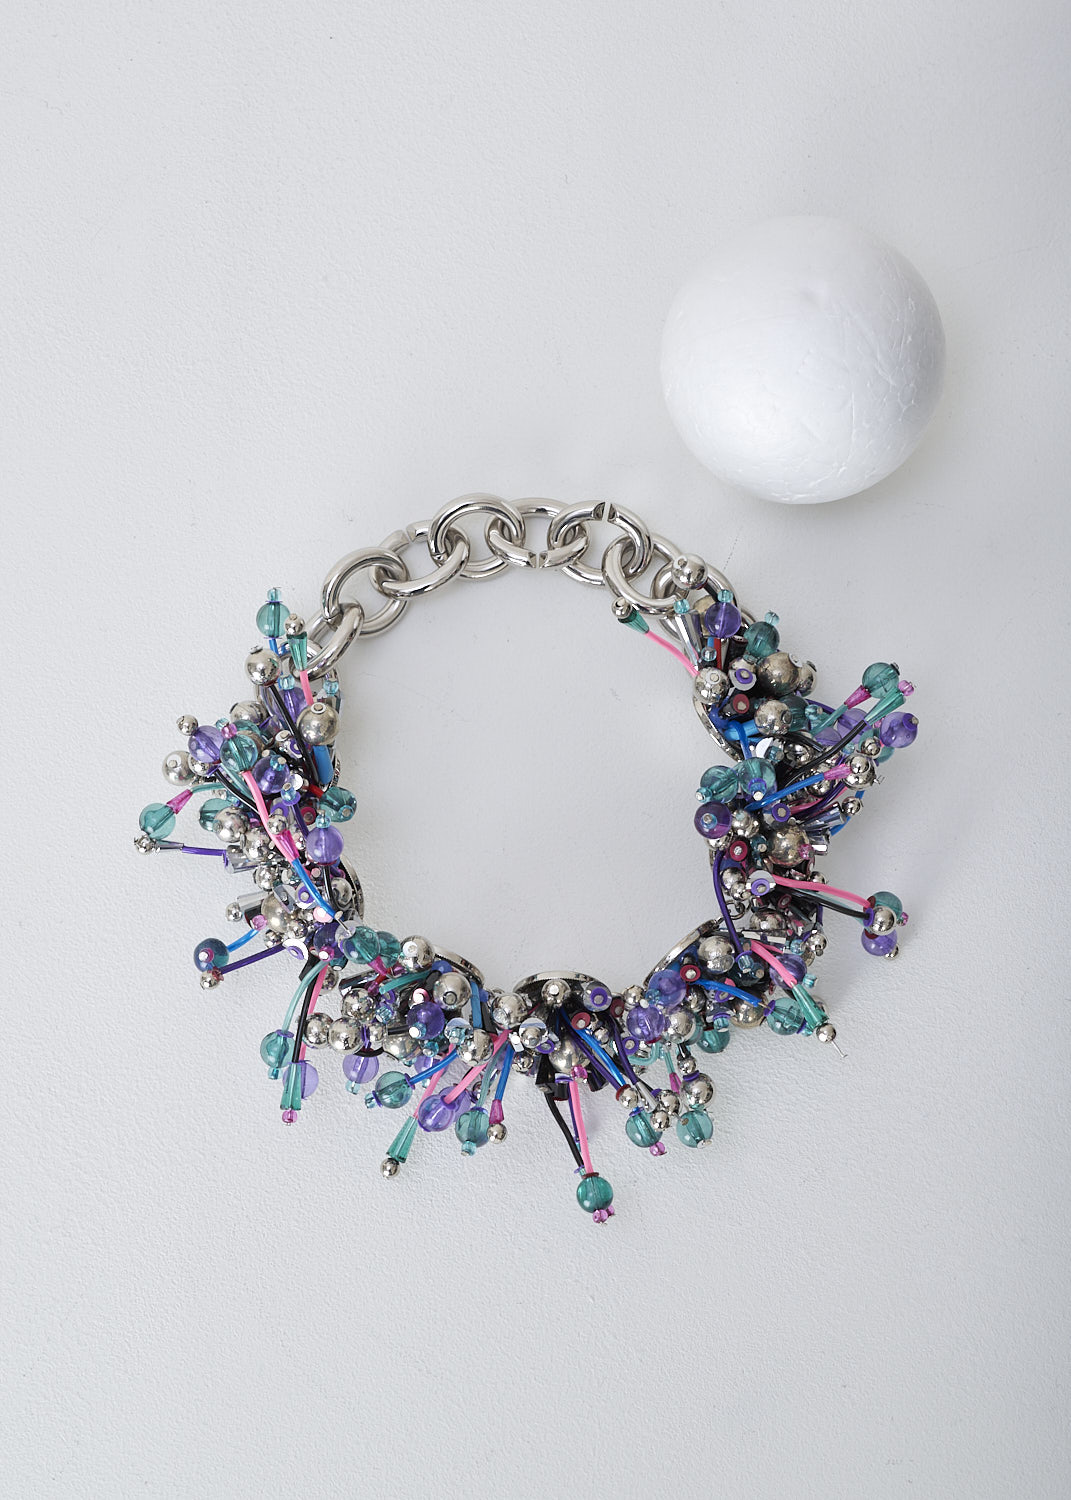 DRIES VAN NOTEN, MULTICOLORED BEADED CHOKER NECKLACE, NECKLACE221_001_Q72_W_NECKL_PUR, Purple, Silver, Pink, Front, This choker necklace has multicolored beads in varying lengths.  There are small slots in the chunky chain which are used to link them together, functioning as the closure option. The chain is adjustable in length. 

circumference: 44.5 cm / 17.5 inch 